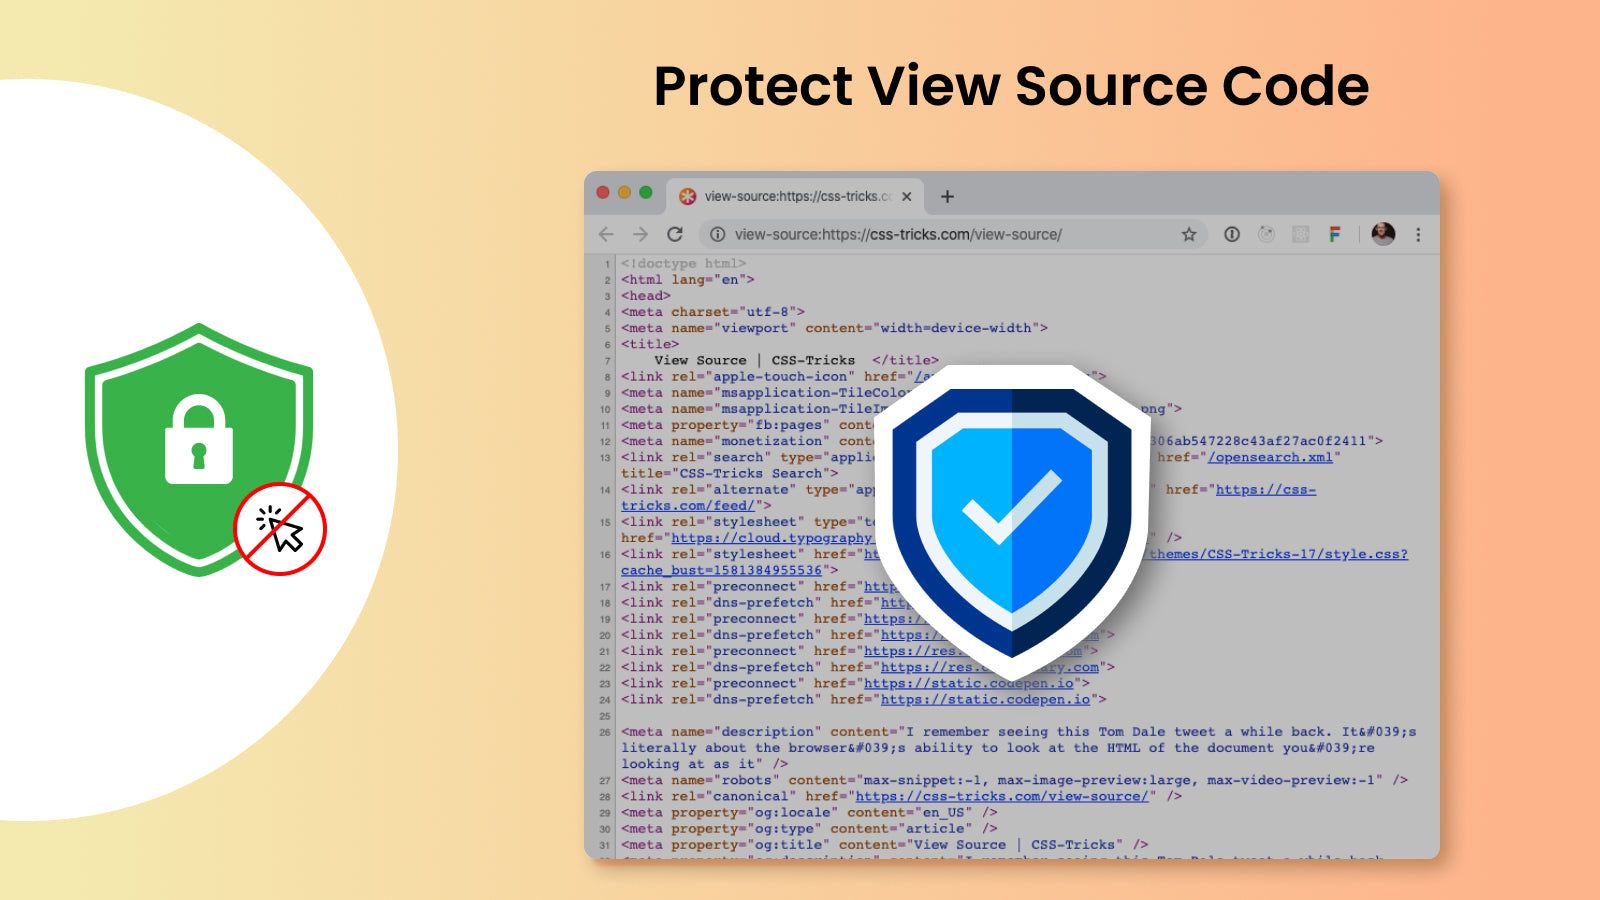 View source protection